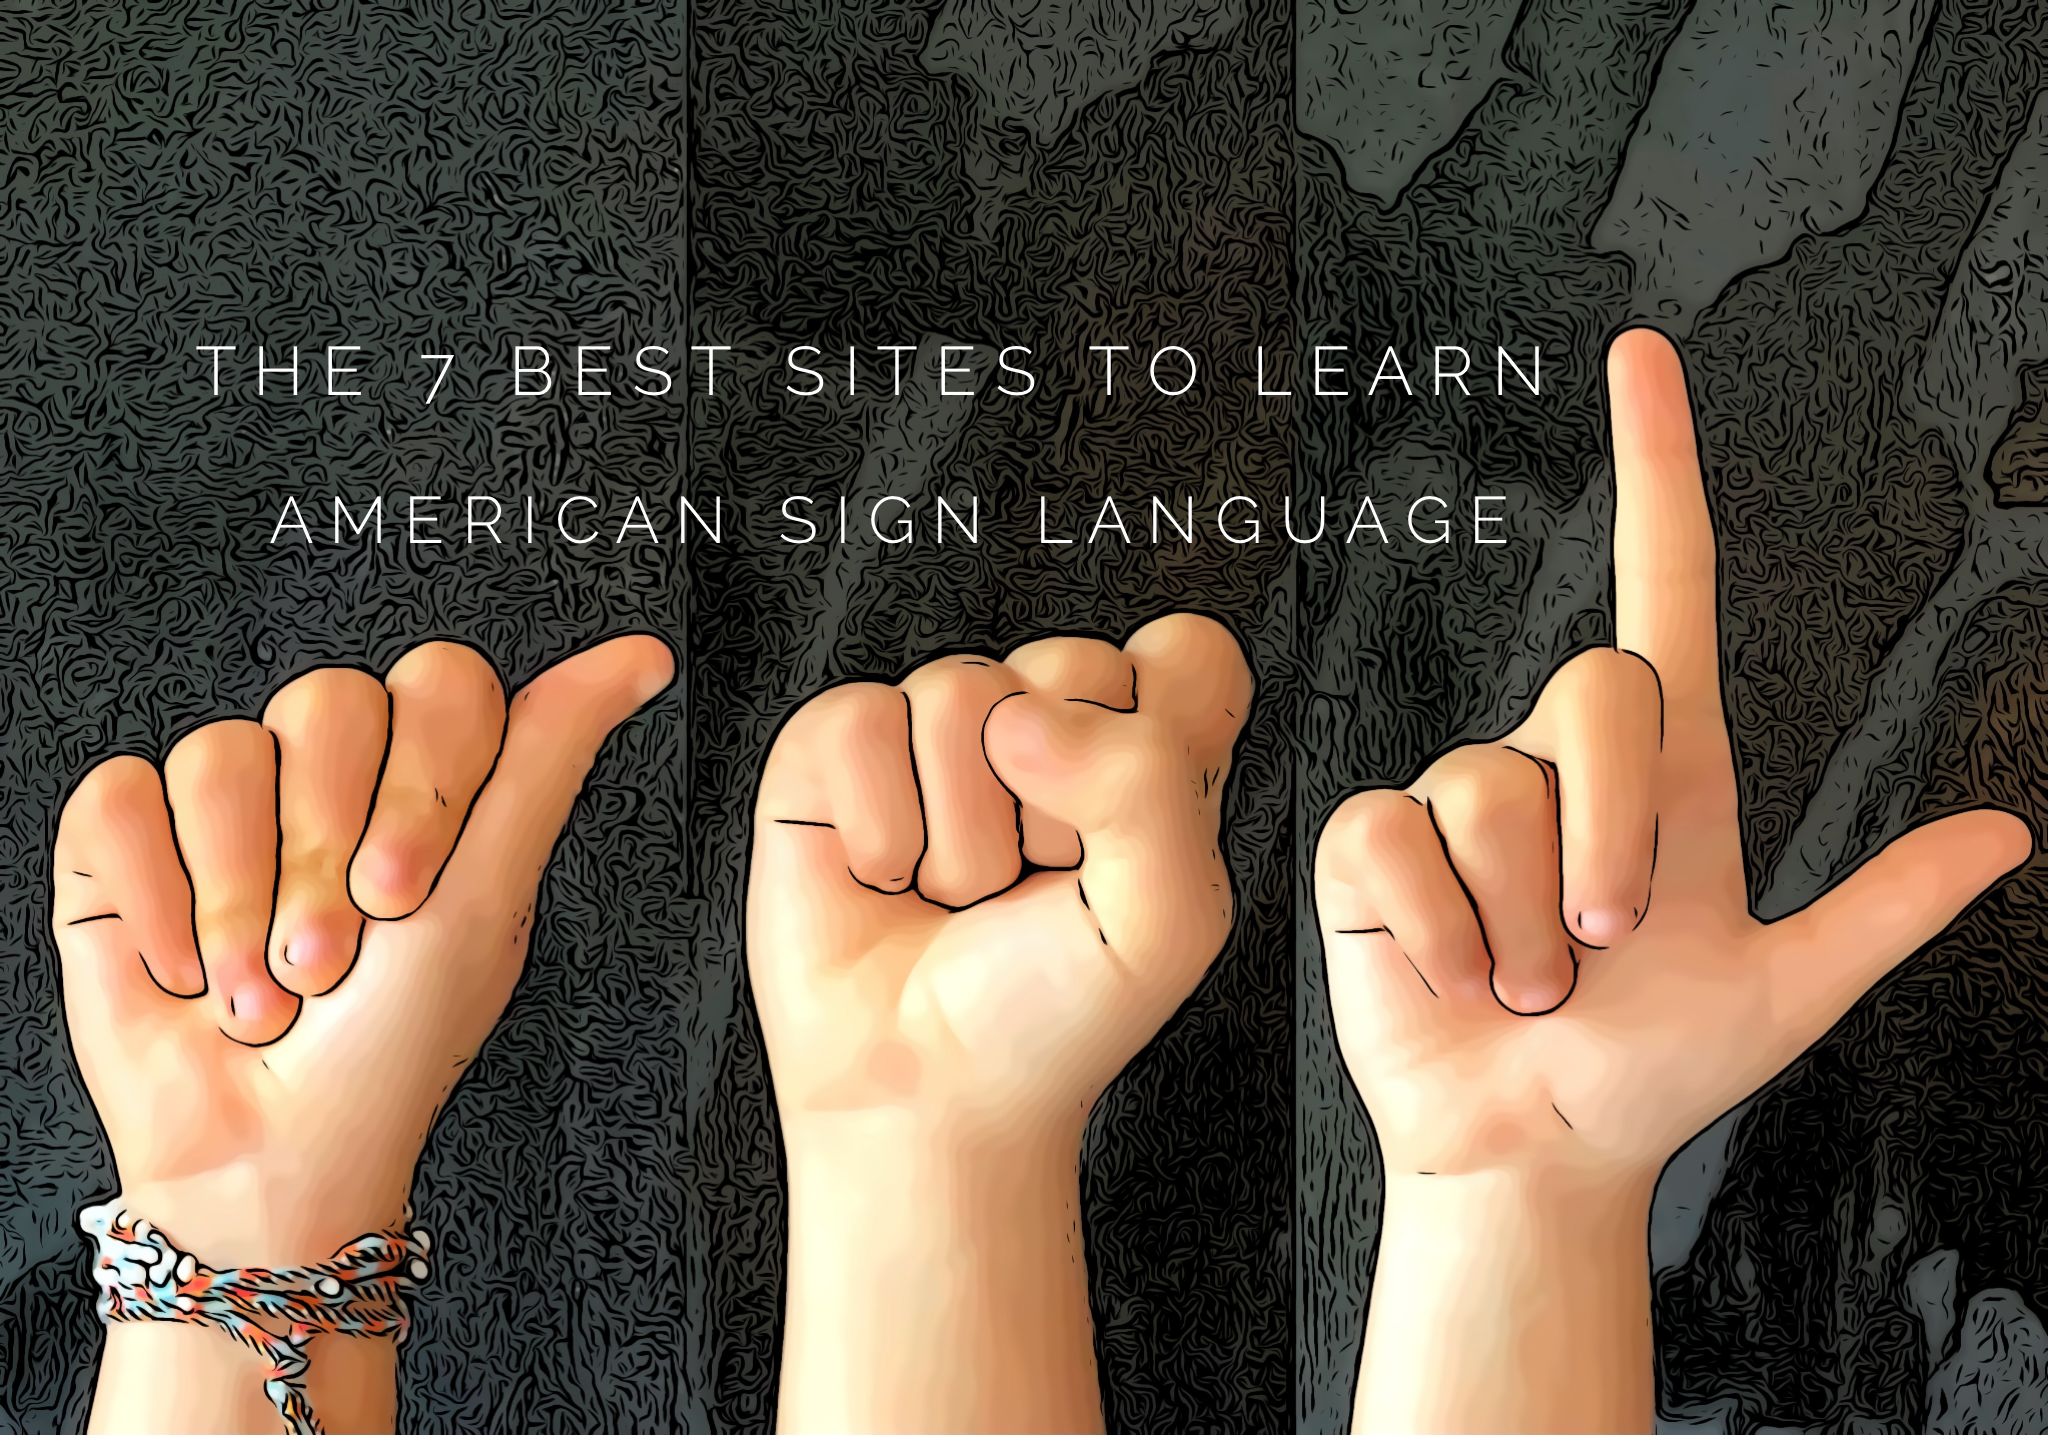 The Best Sites to Learn American Sign Language